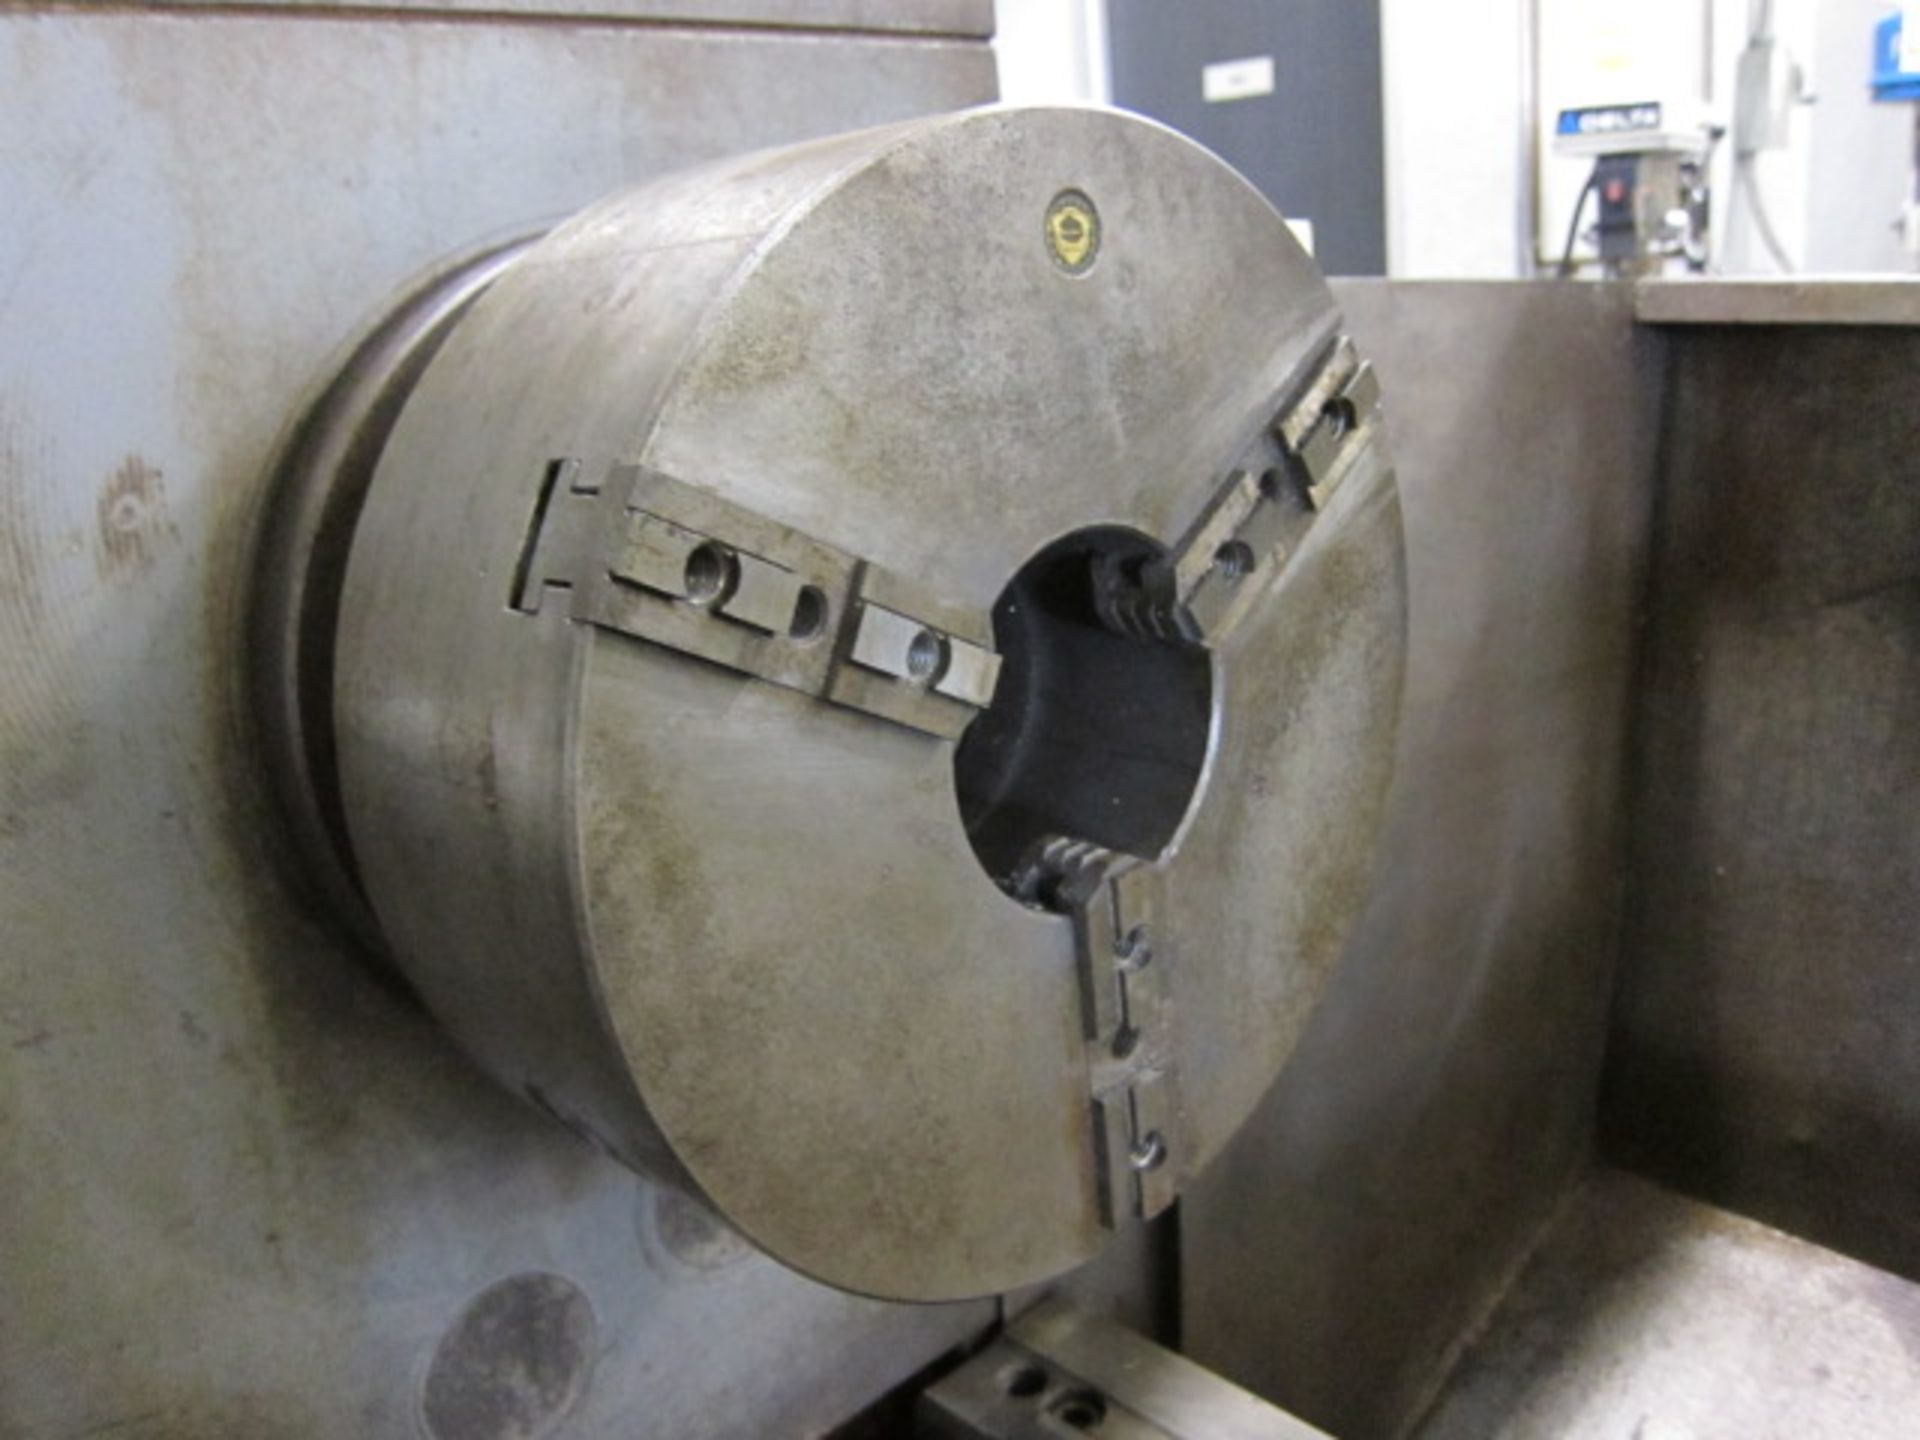 ENGINE LATHE, SUMMIT 28" X 120", 4-1/4" spdl. hole, spds: 16-1250 RPM, taper attach, 2-axis D.R. - Image 2 of 9